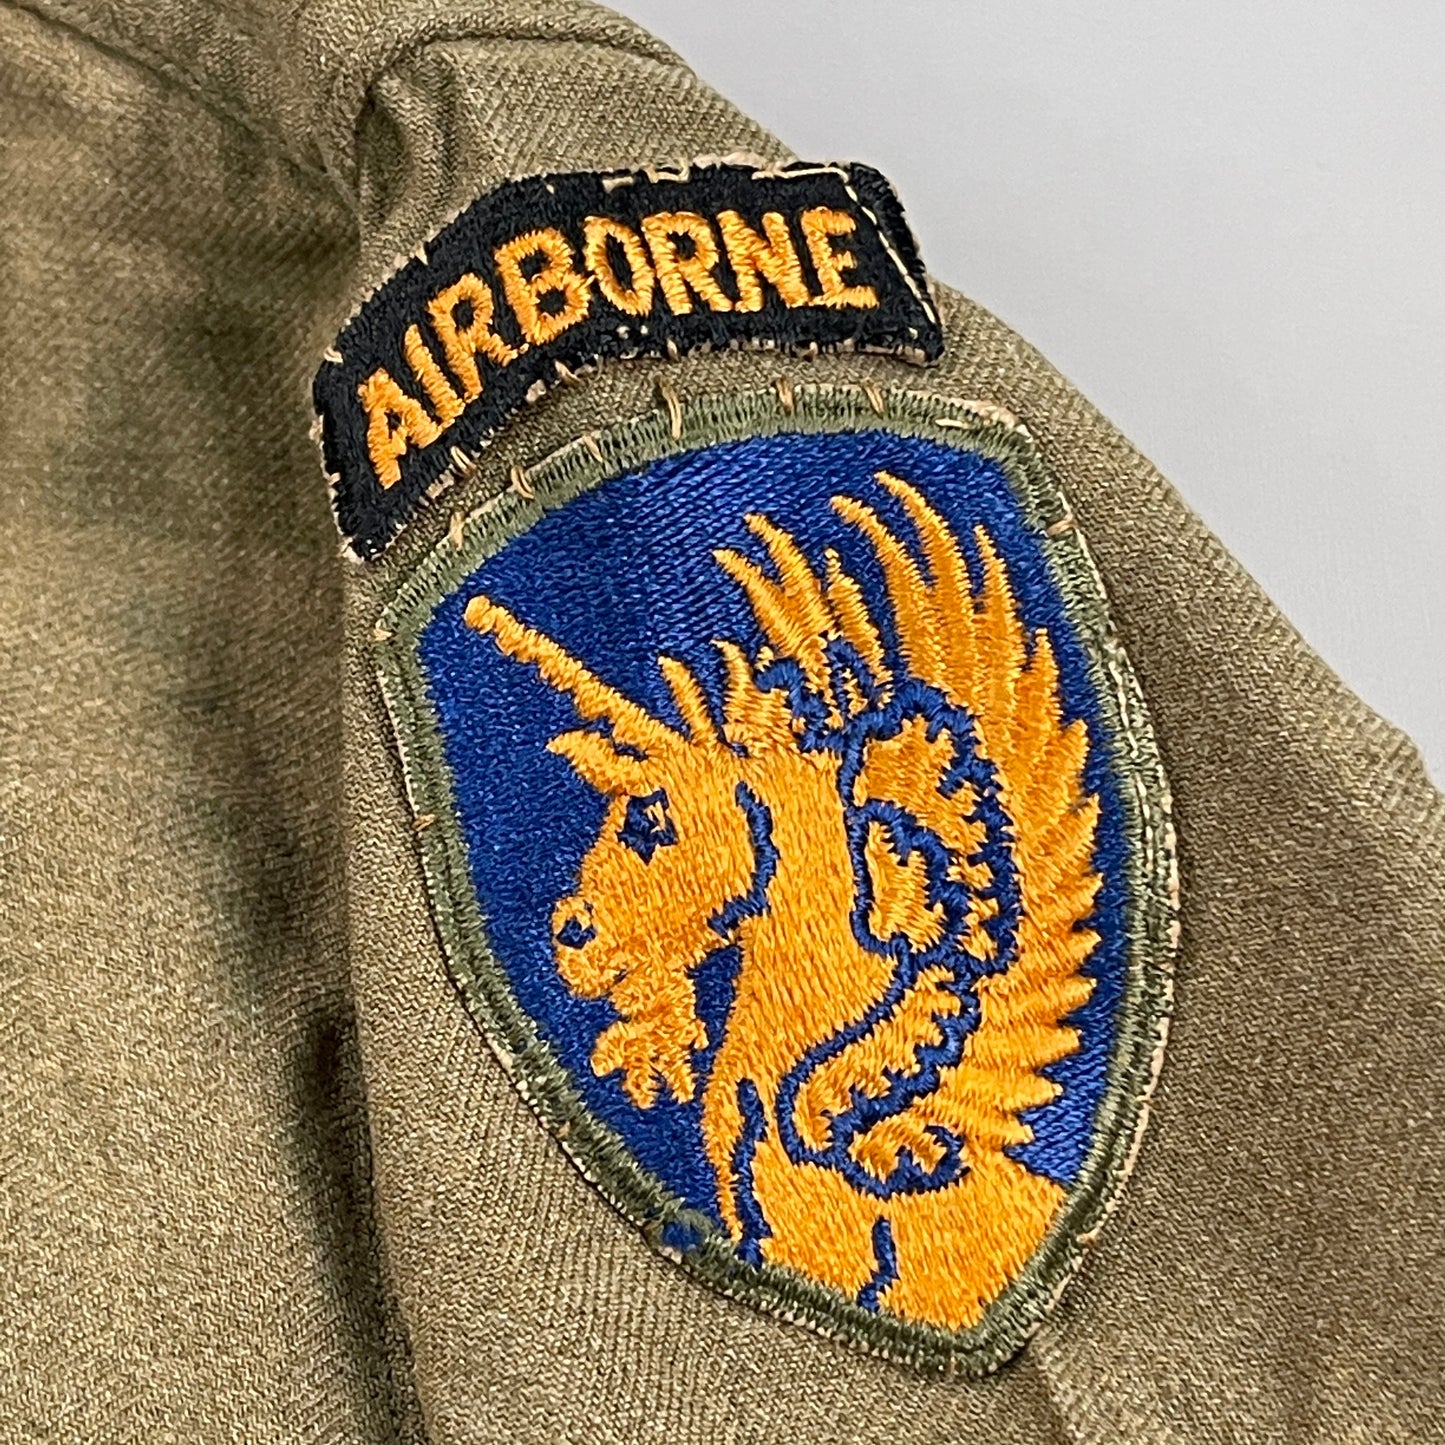 WWII U.S. ARMY 13th AIRBORNE DIVISION Golden Unicorn Patch Button-Down Shirt VINTAGE Men's Sz M Green (Pre-Owned)